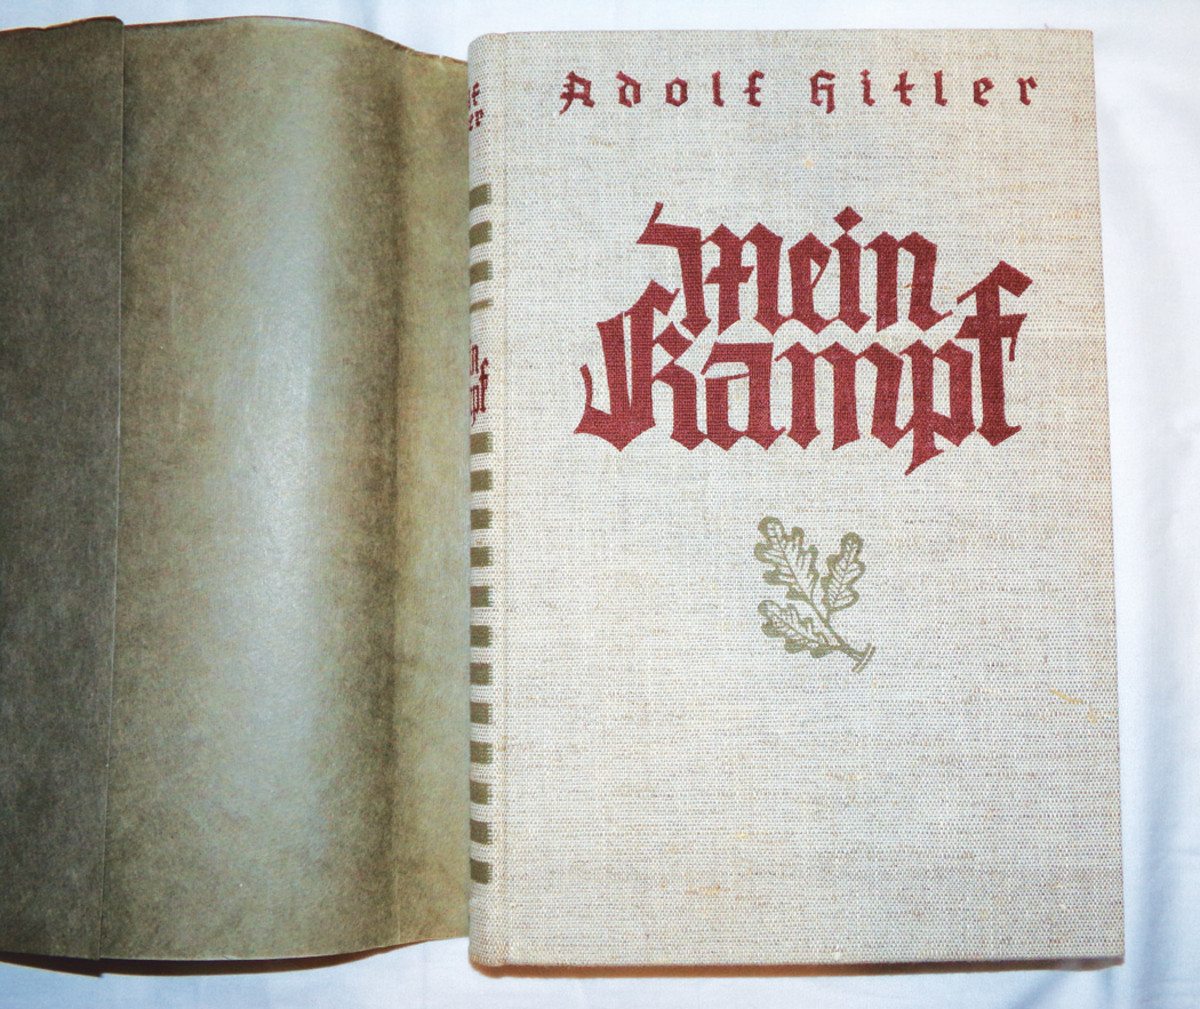 1937 printing with rare dust cover, one of two volumes.